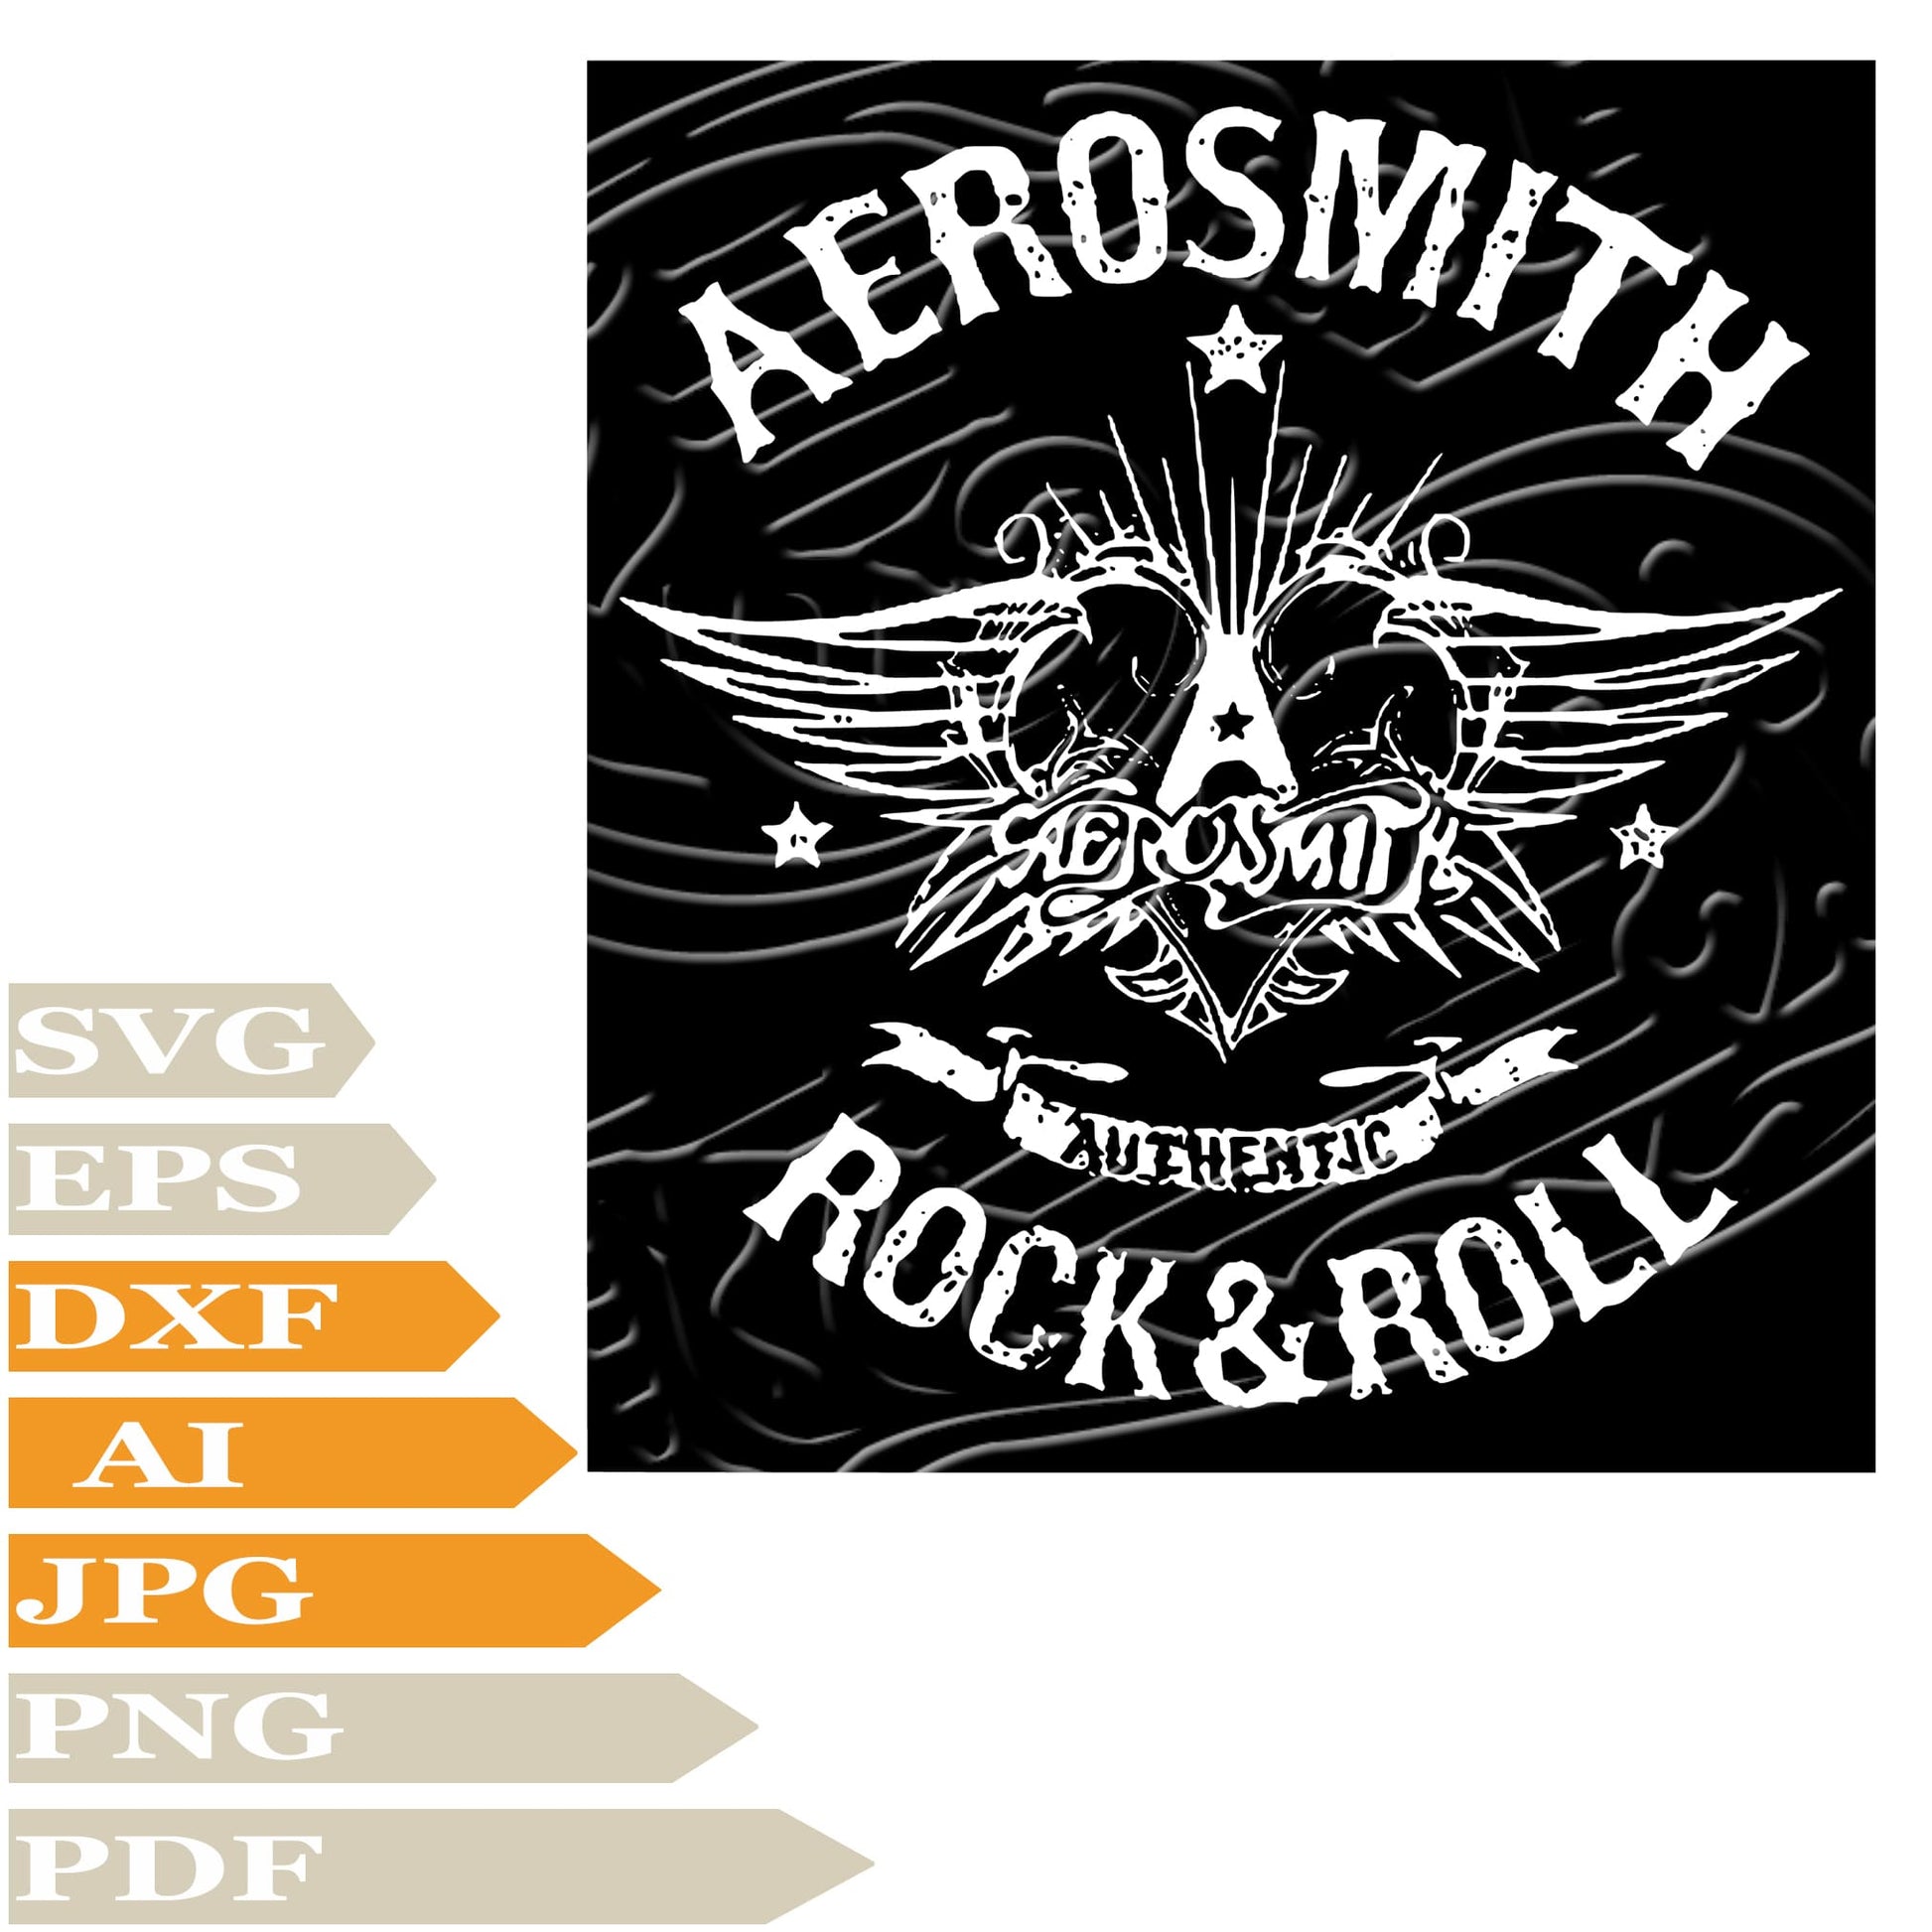 Aerosmith, Aerosmith Rock N Roll Logo Svg File, Image Cut, Png, For Tattoo, Silhouette, Digital Vector Download, Cut File, Clipart, For Cricut